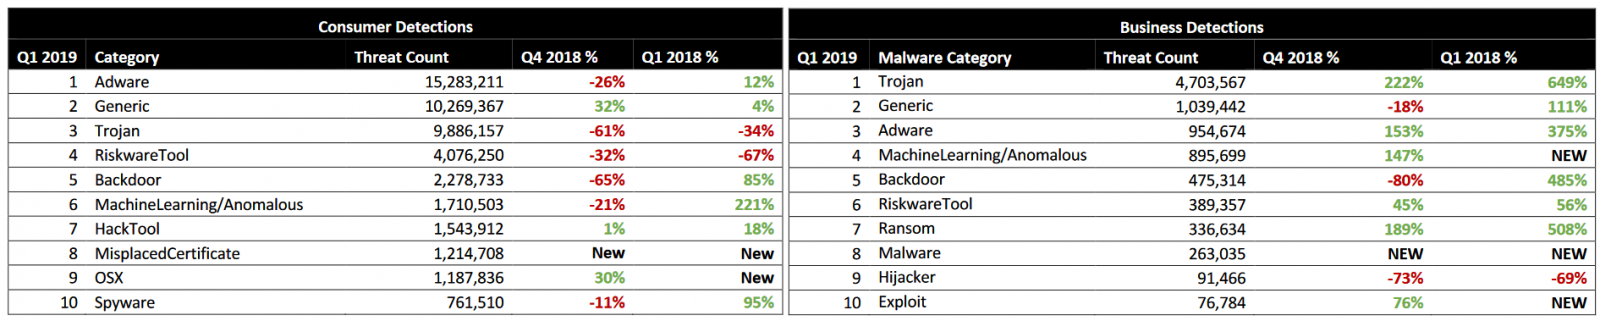 Consumer and business malware detections